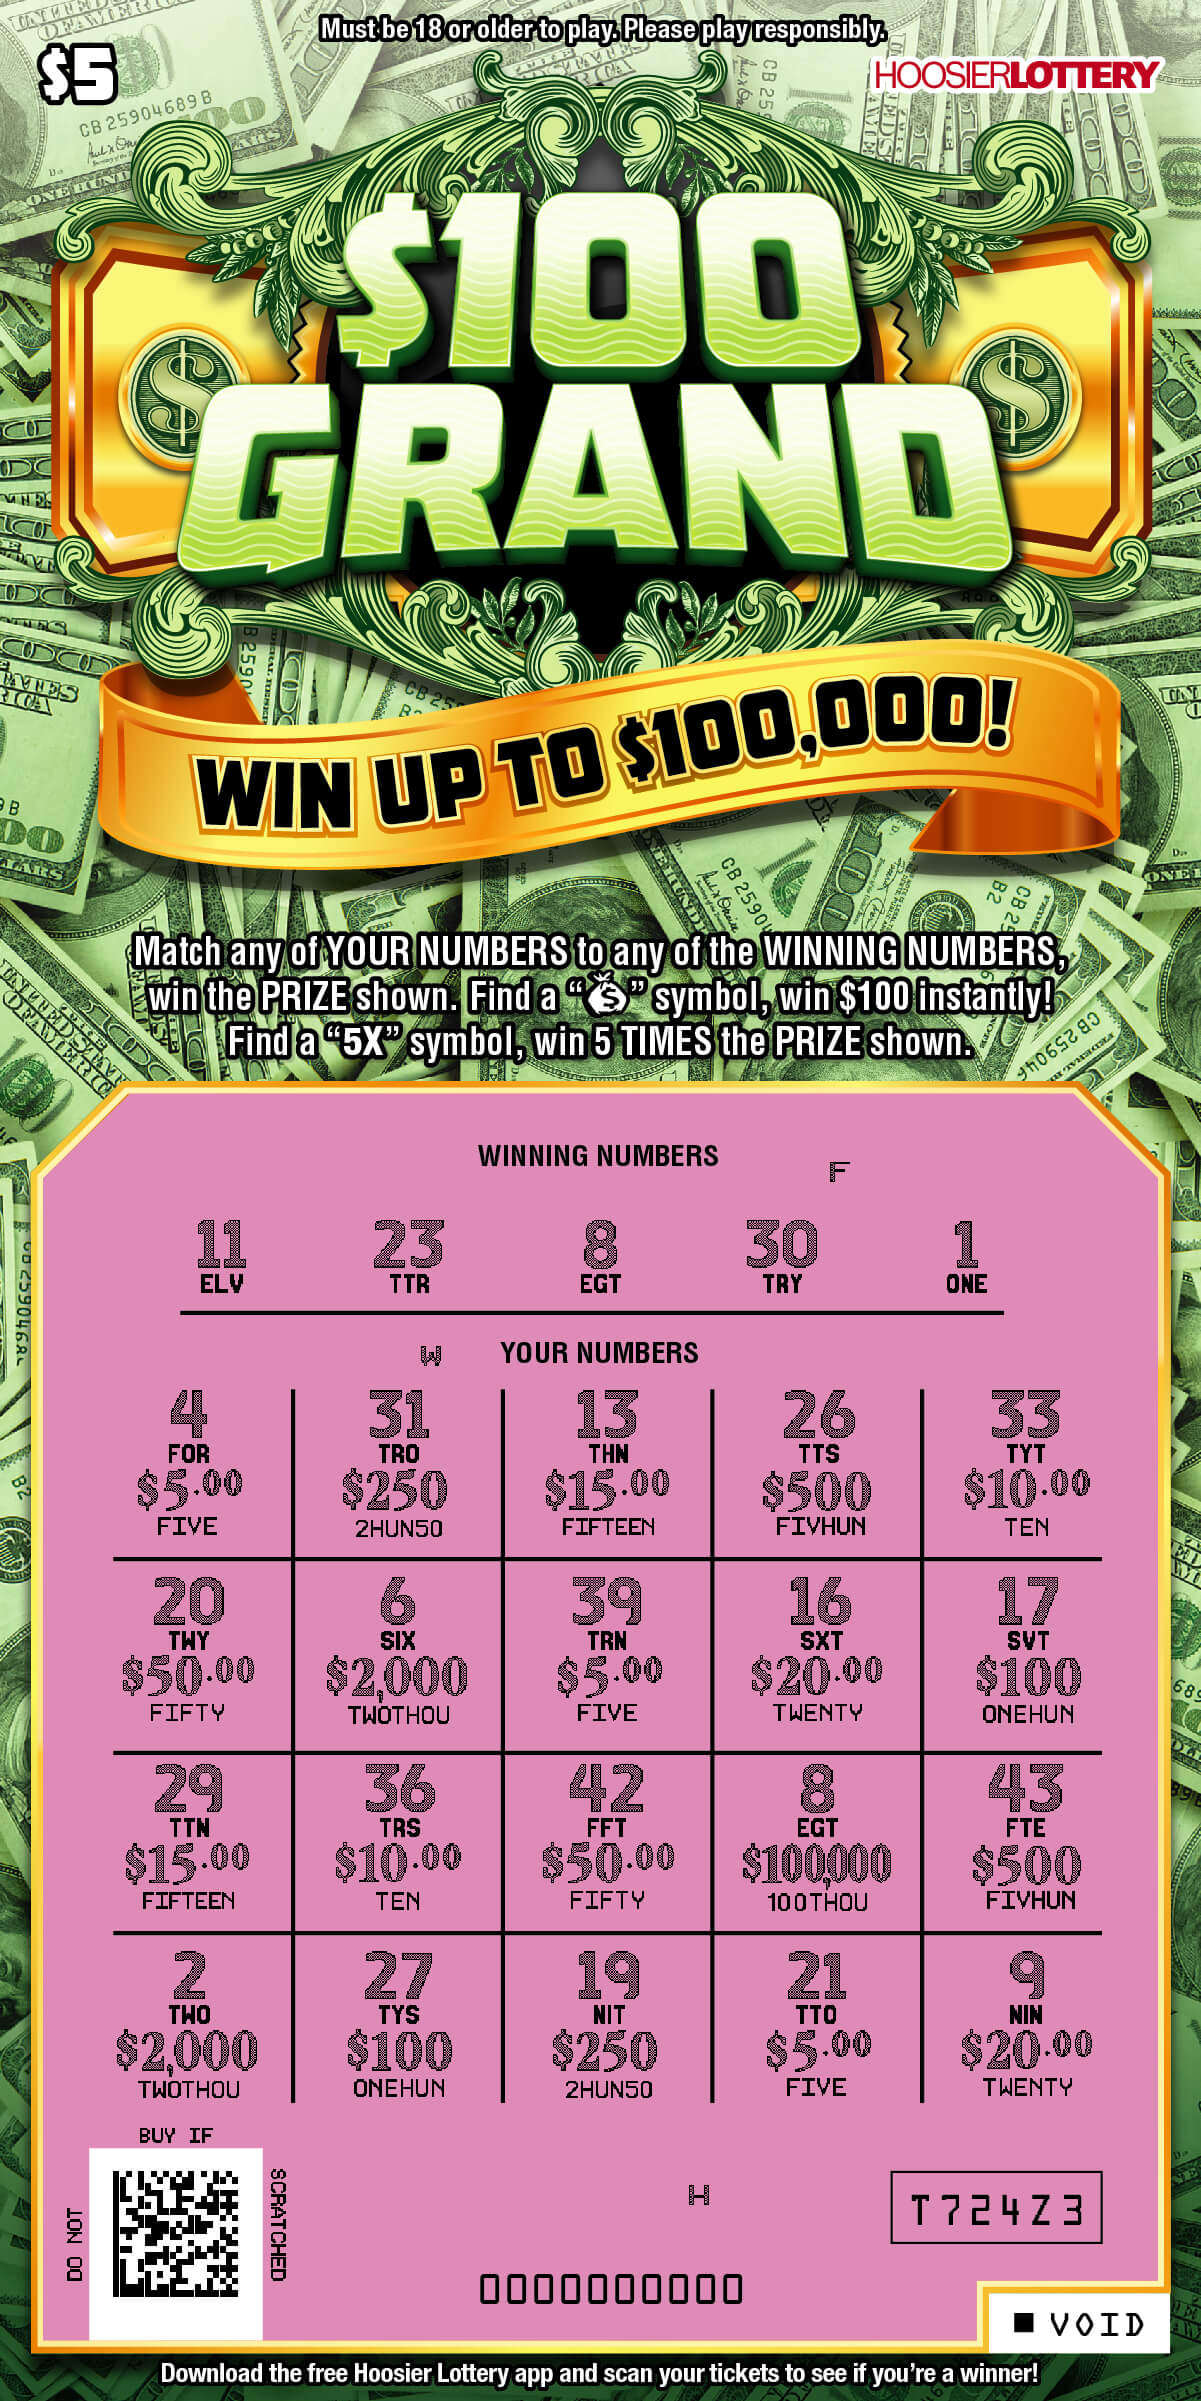 Won $100 by winning on every possible scratch-off area : r/mildlyinteresting